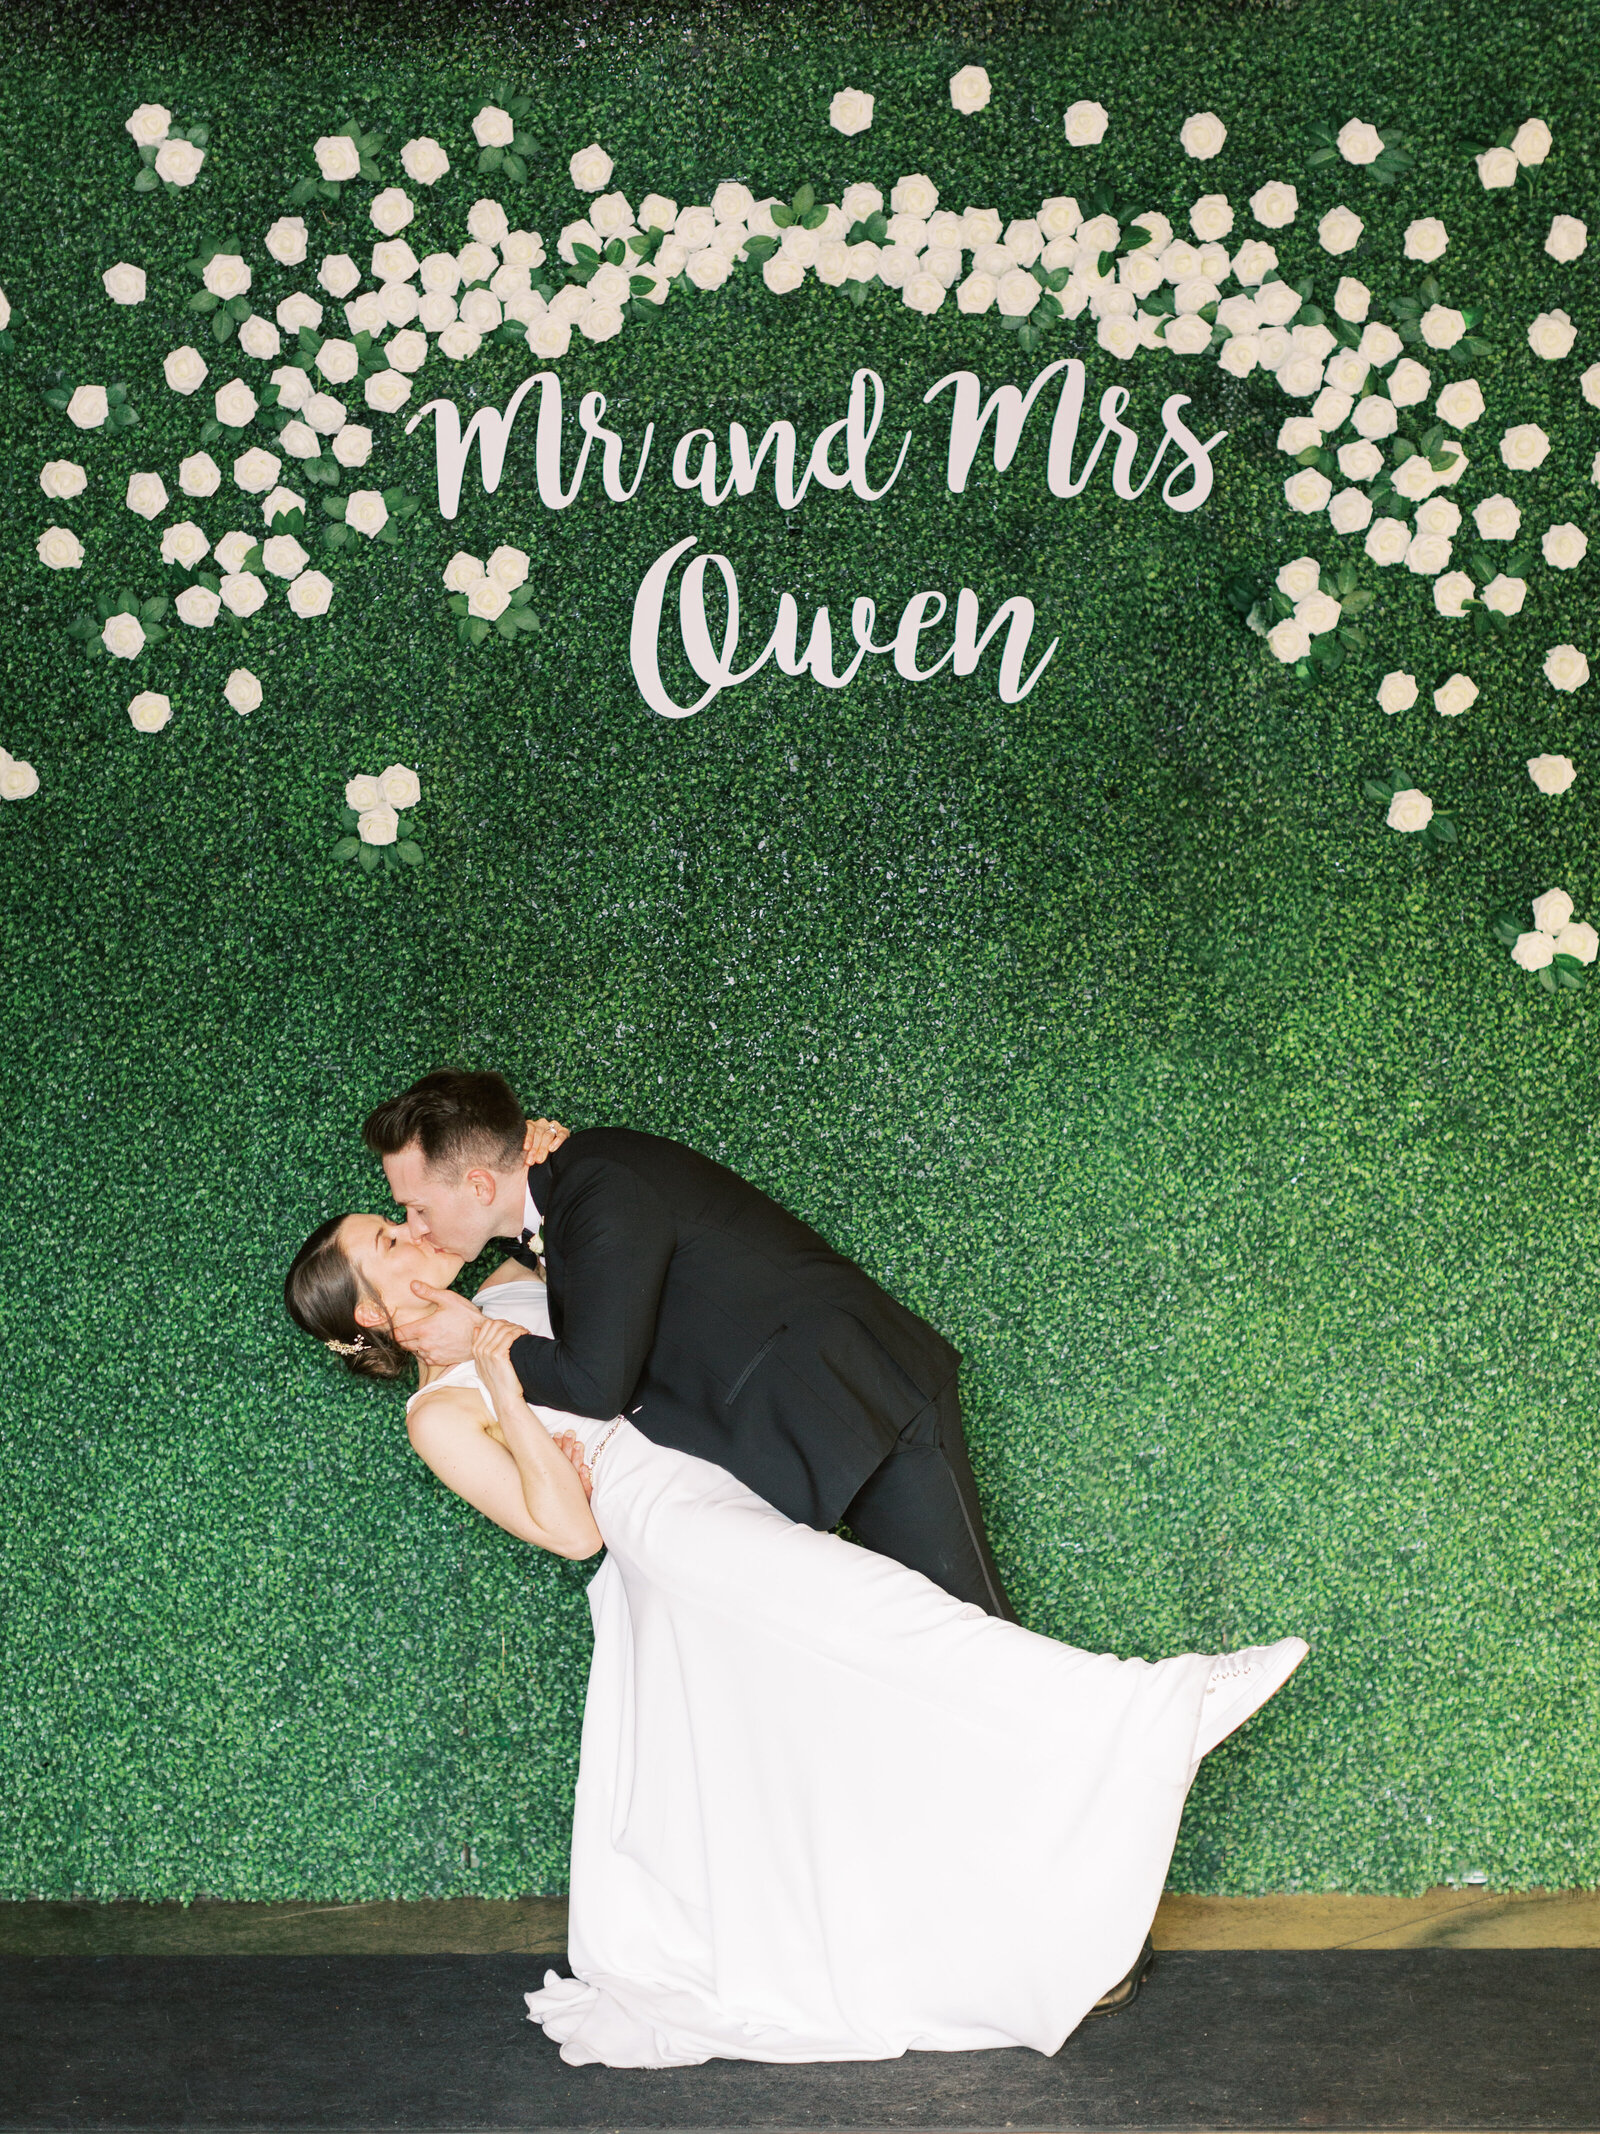 wedding photo backdrop  made of greenery and roses